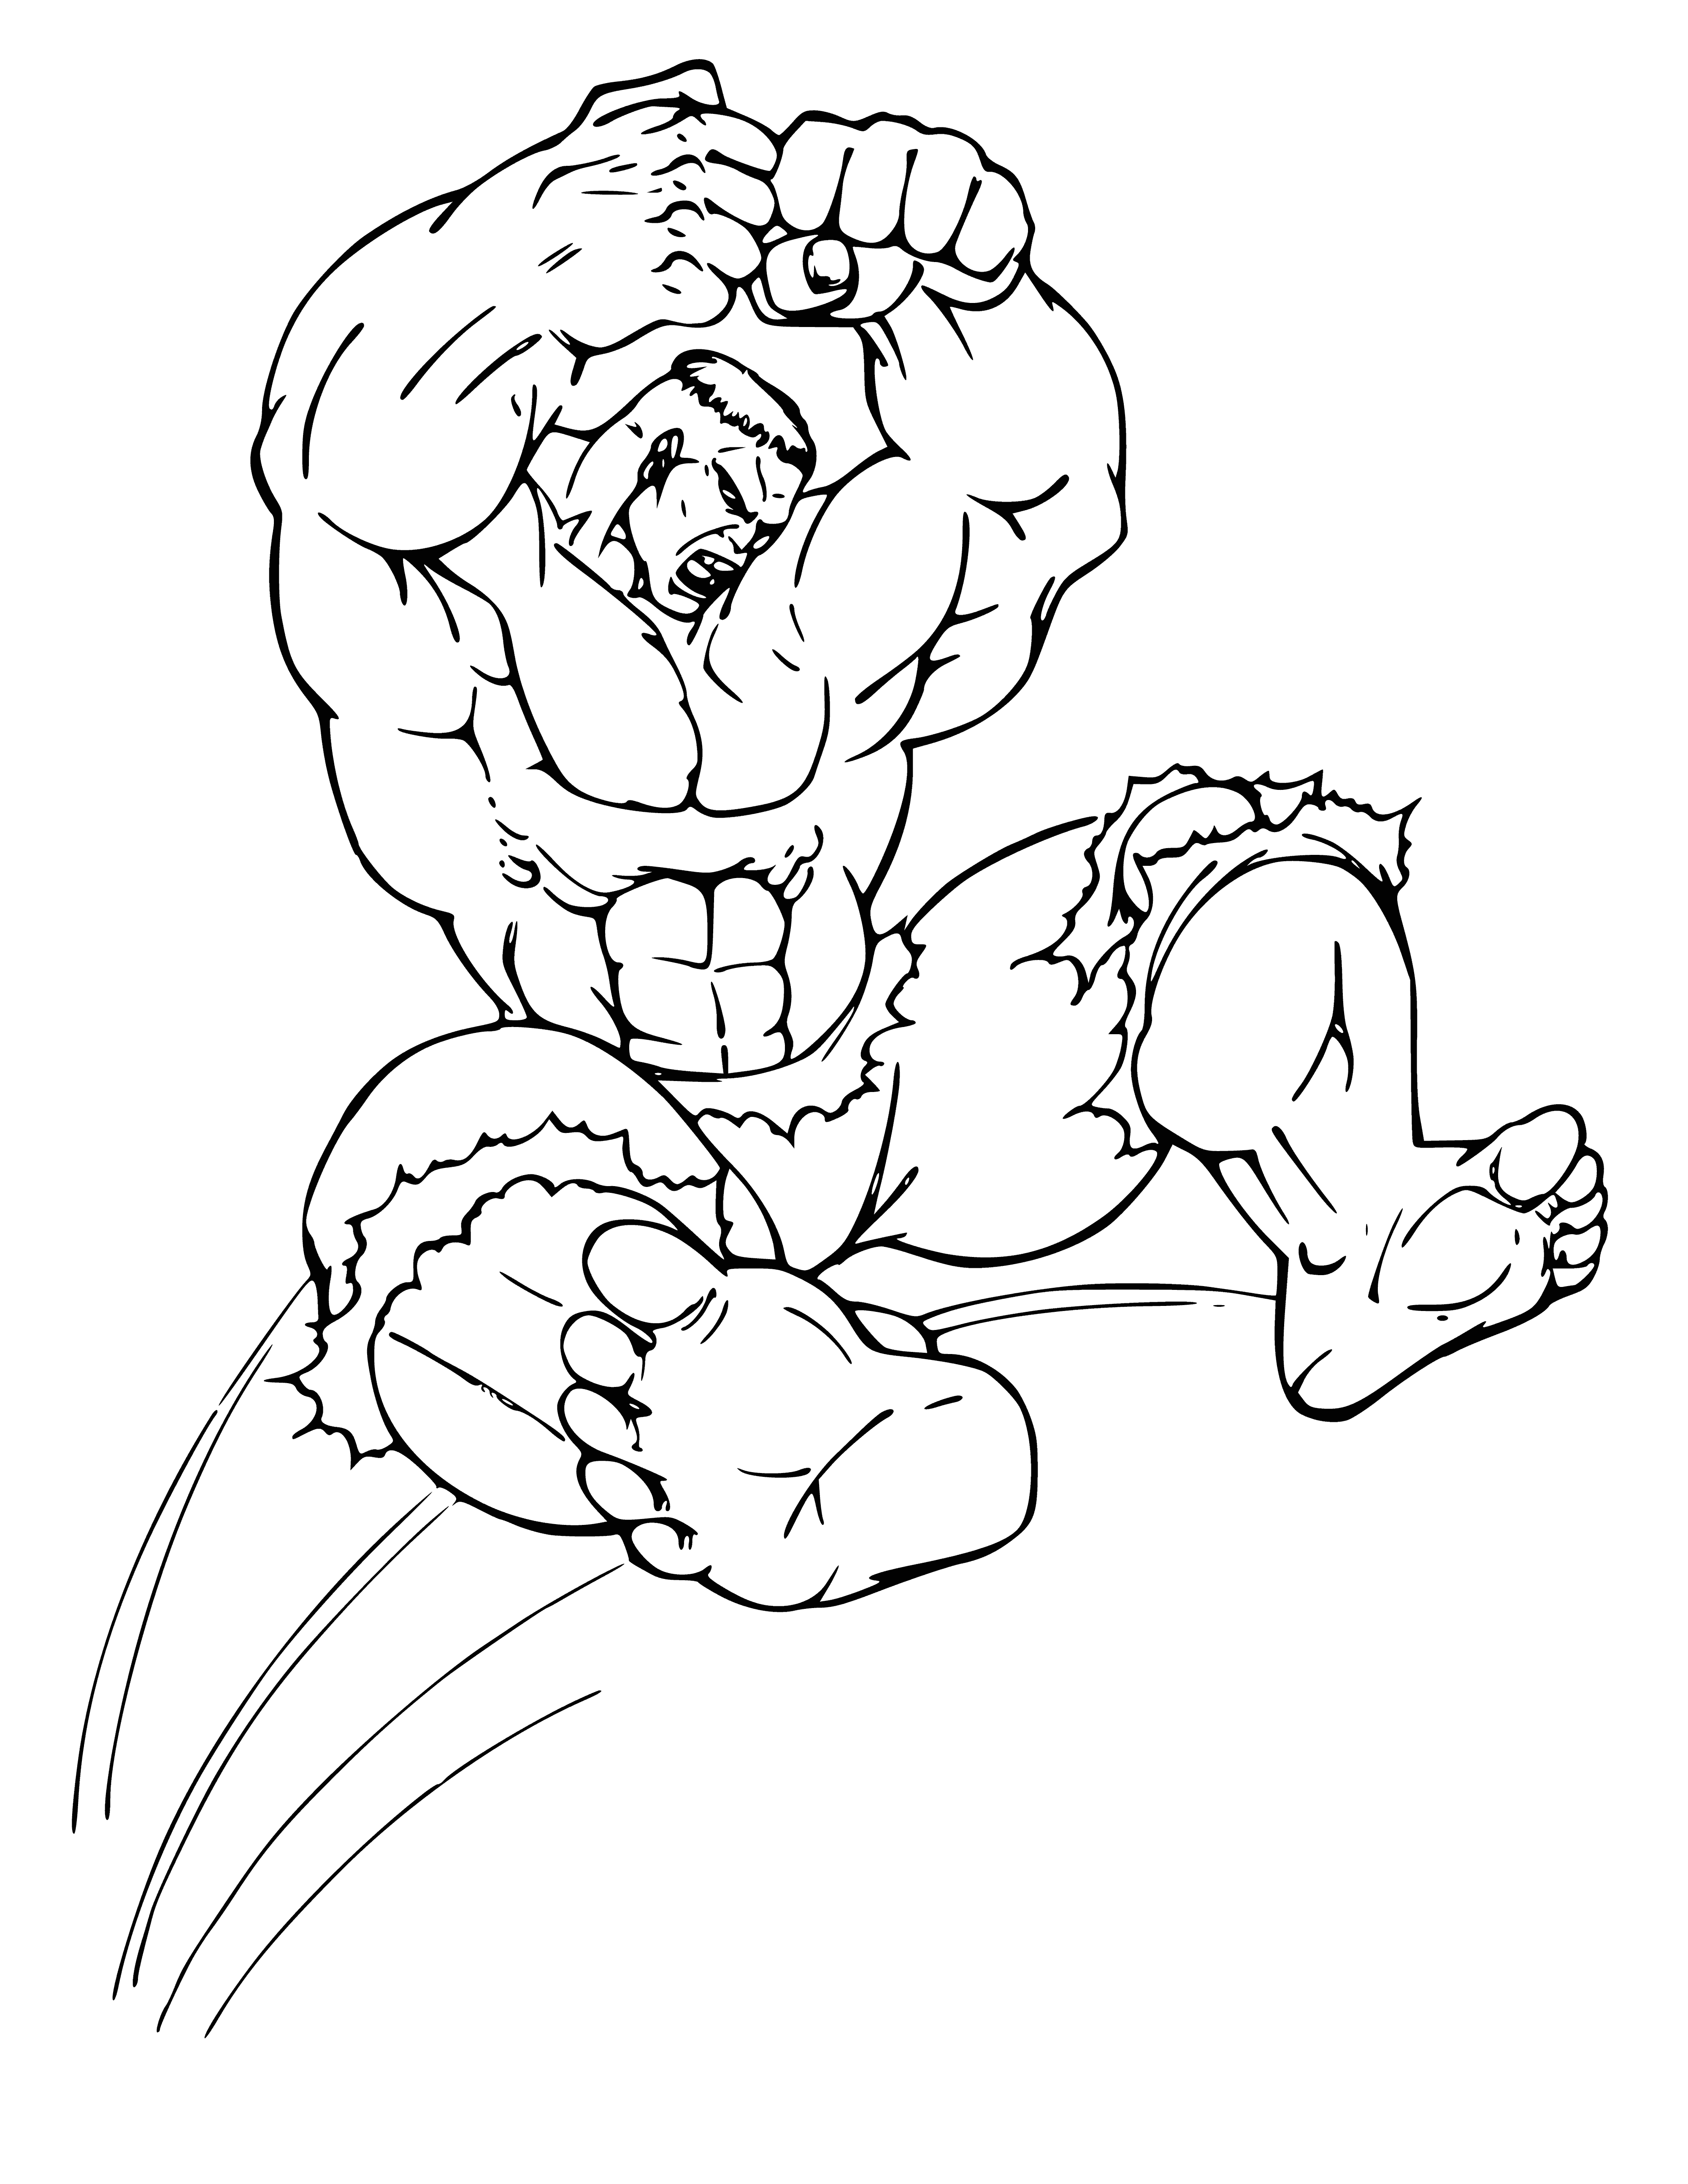 coloring page: Large green creature with bulging muscles bouncing on trampoline. Has wide mouth and big teeth, small angry eyes. Short black hair, wearing purple pants.